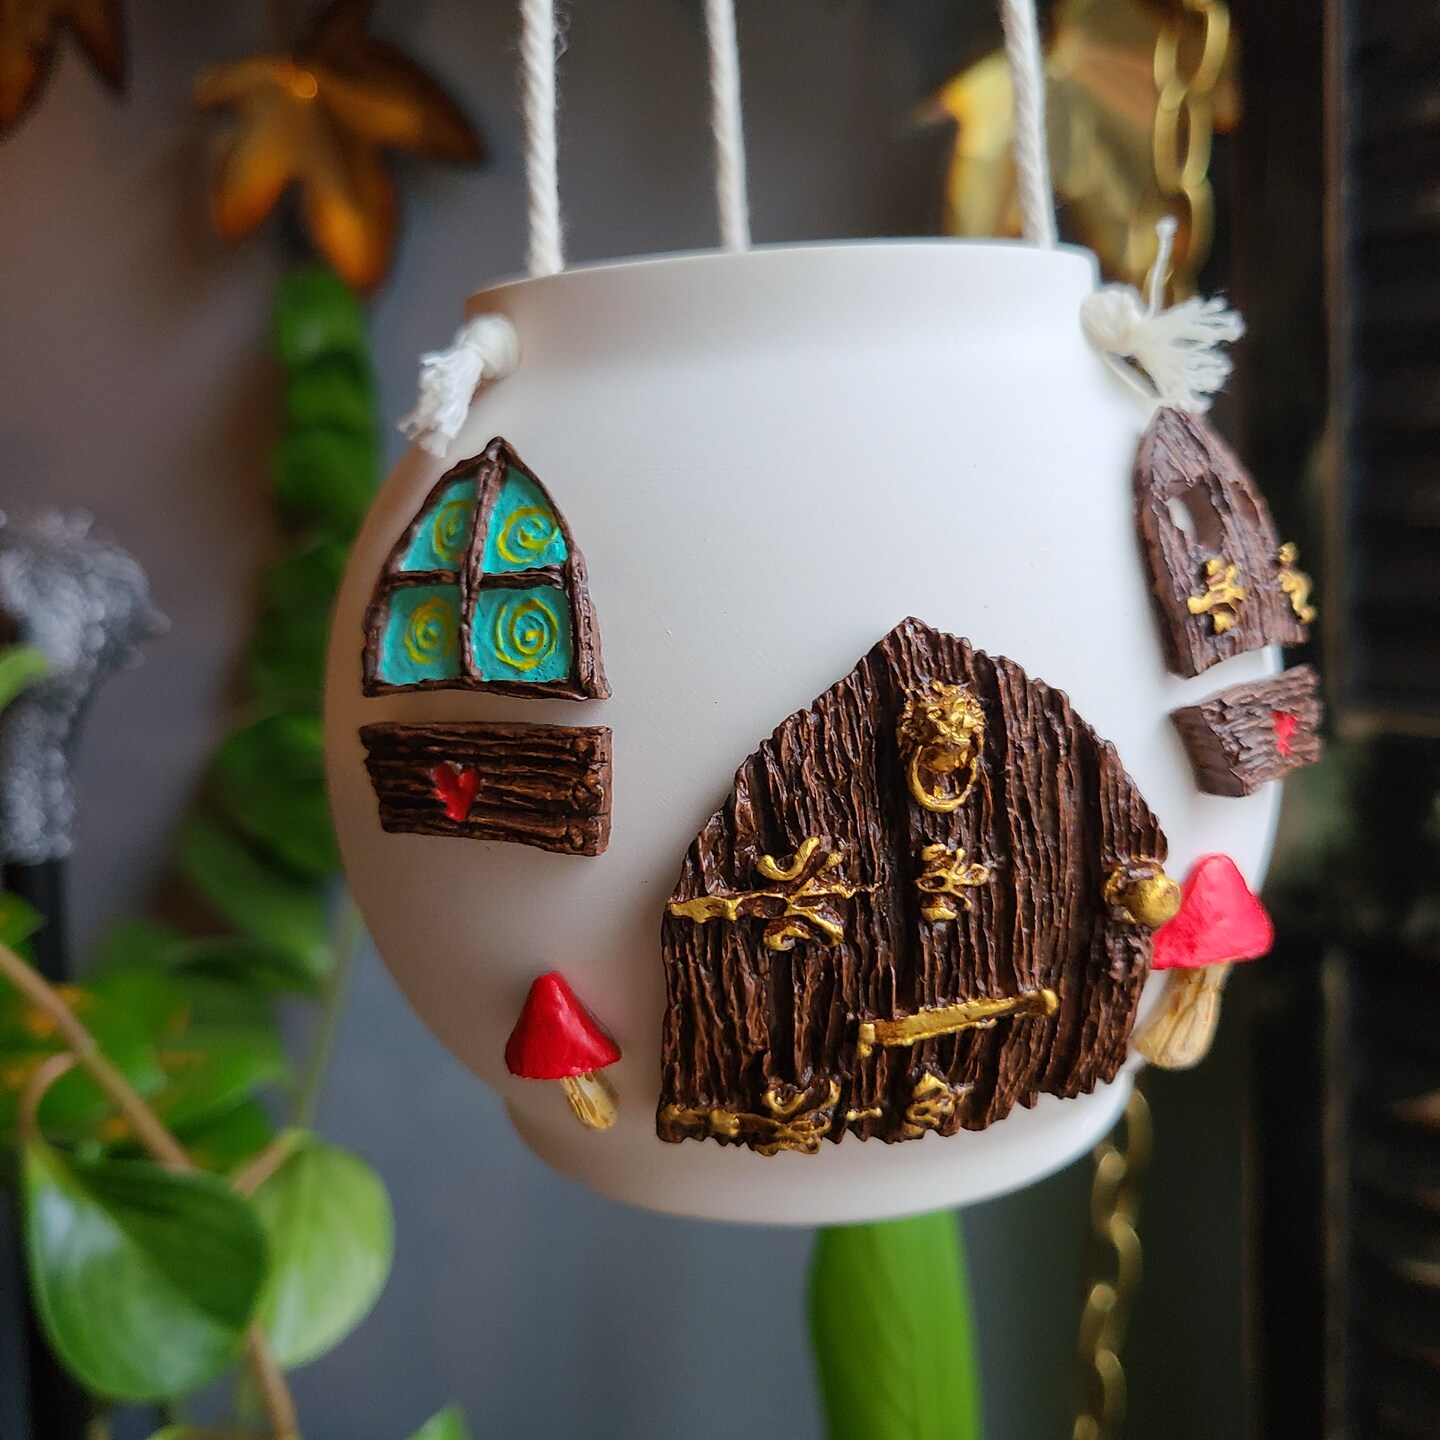 Fairy cottage house hanging pot 285981165235126272